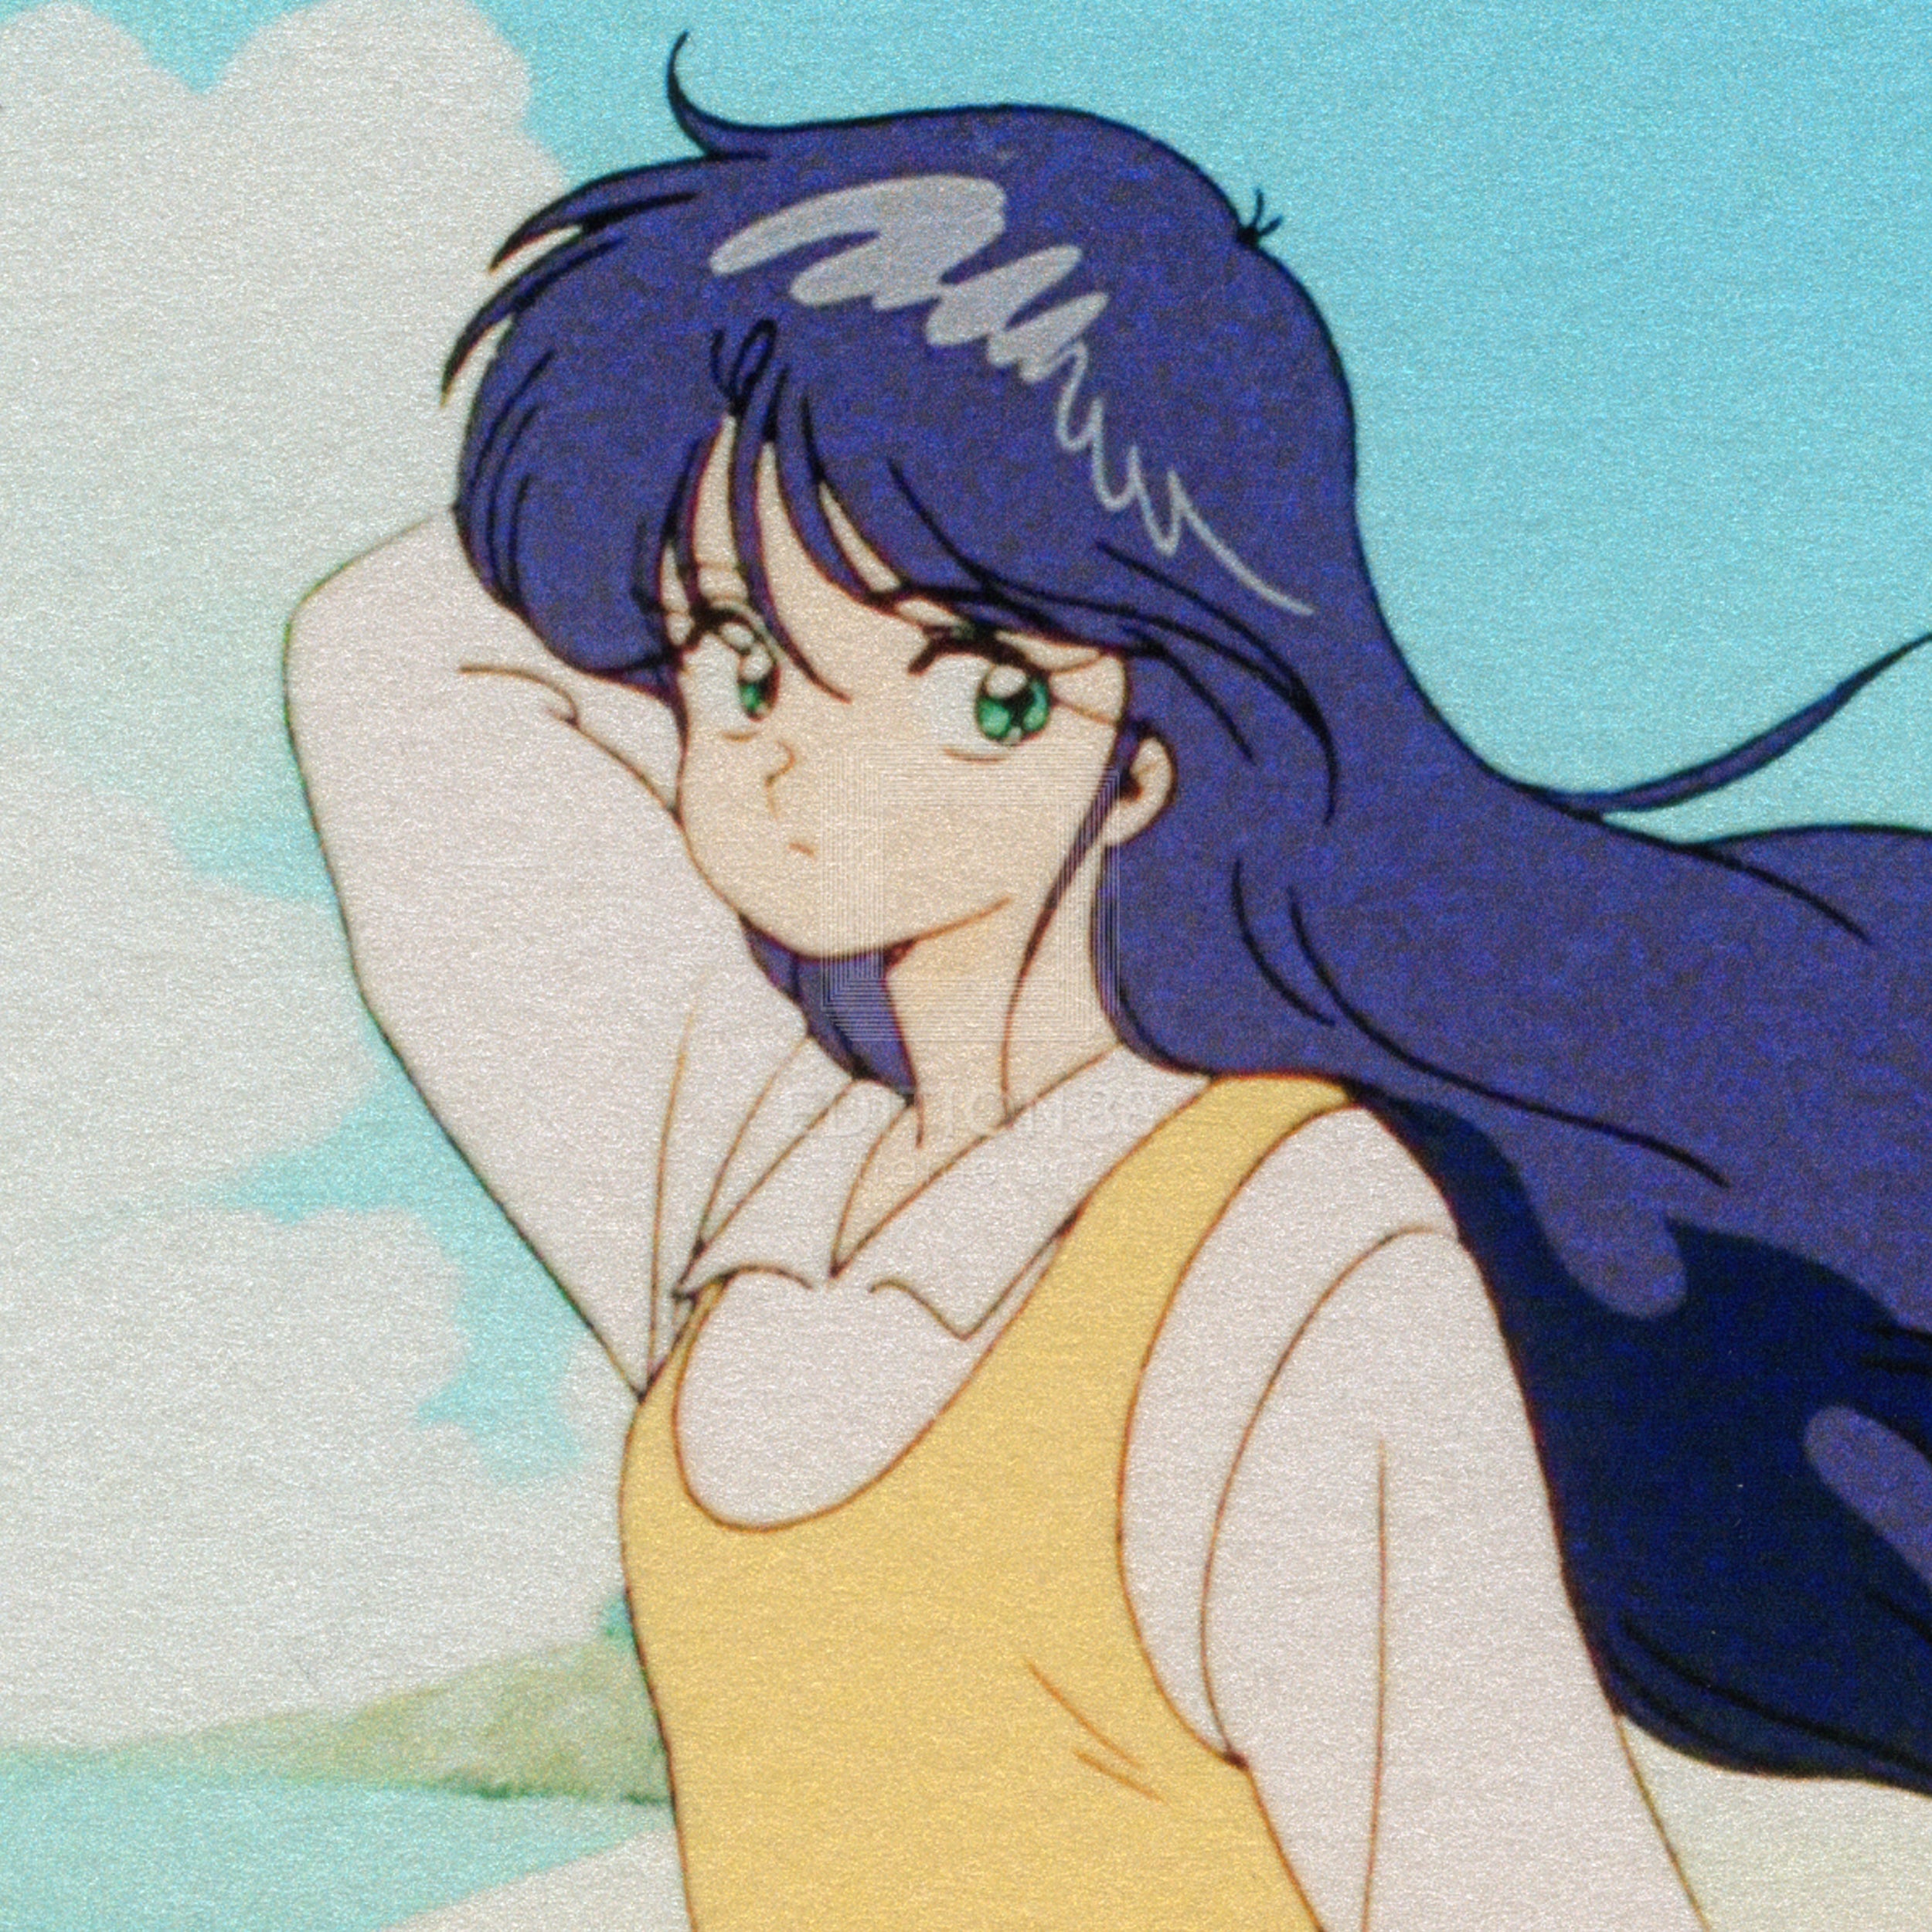 Kimagure Orange Road, 88Filmgraph #7, Episode8 - You’re Smiling! A 'Shutter-Chance' at the Beach